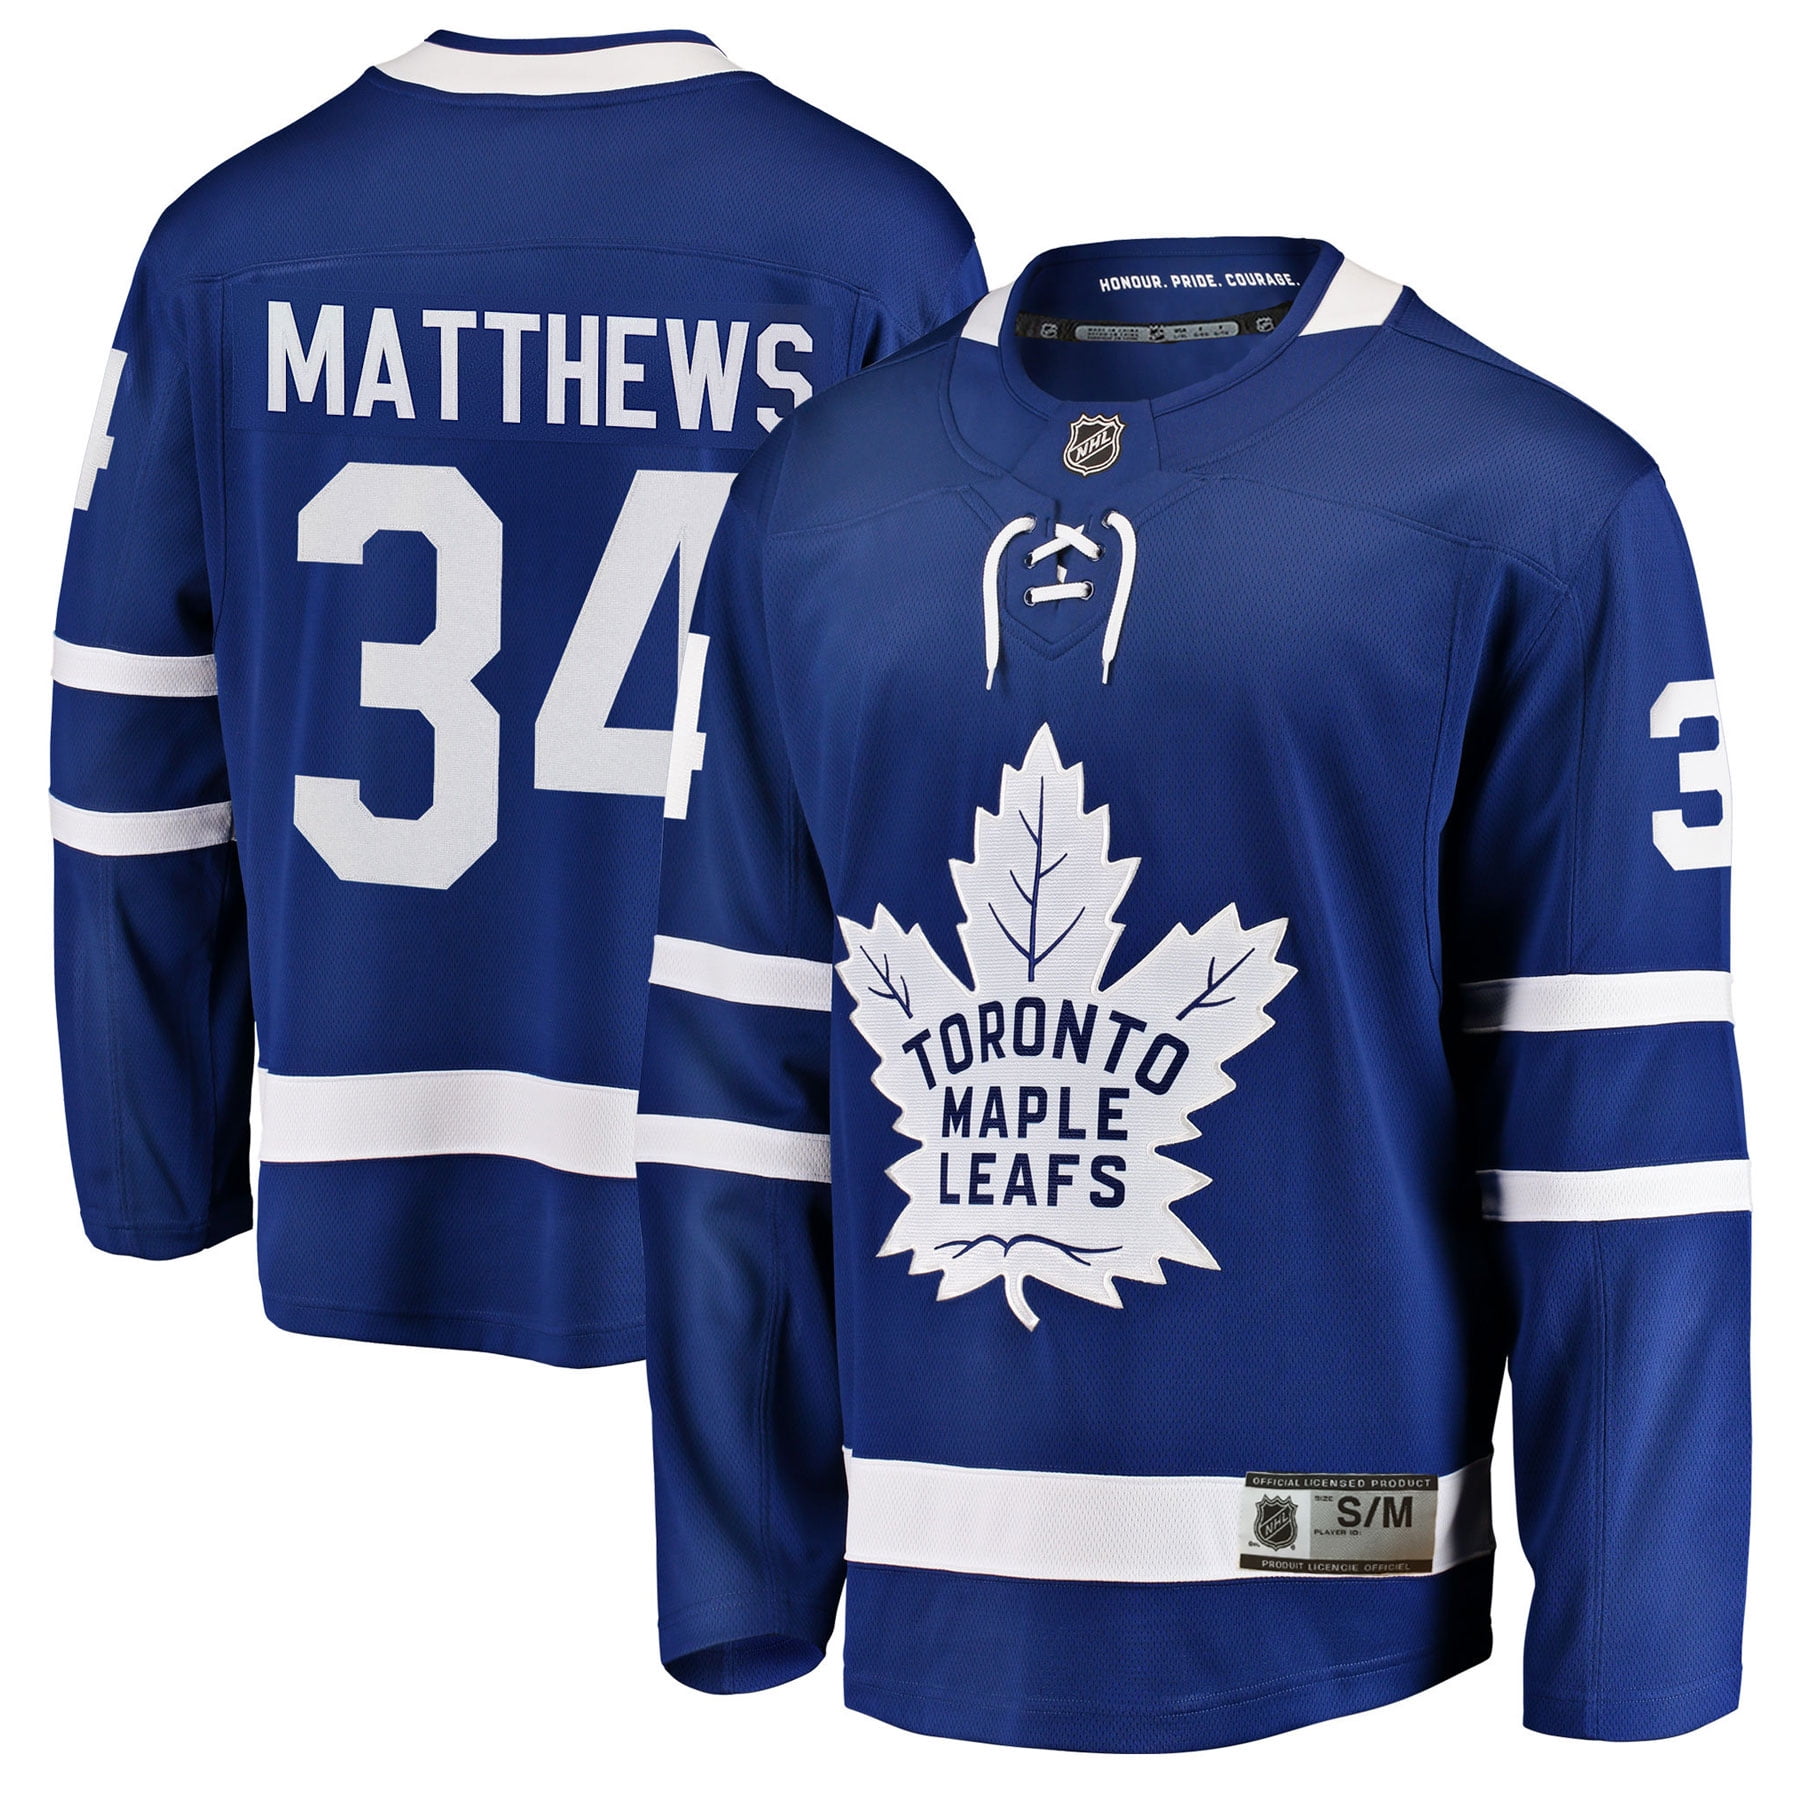 where to buy maple leafs jersey